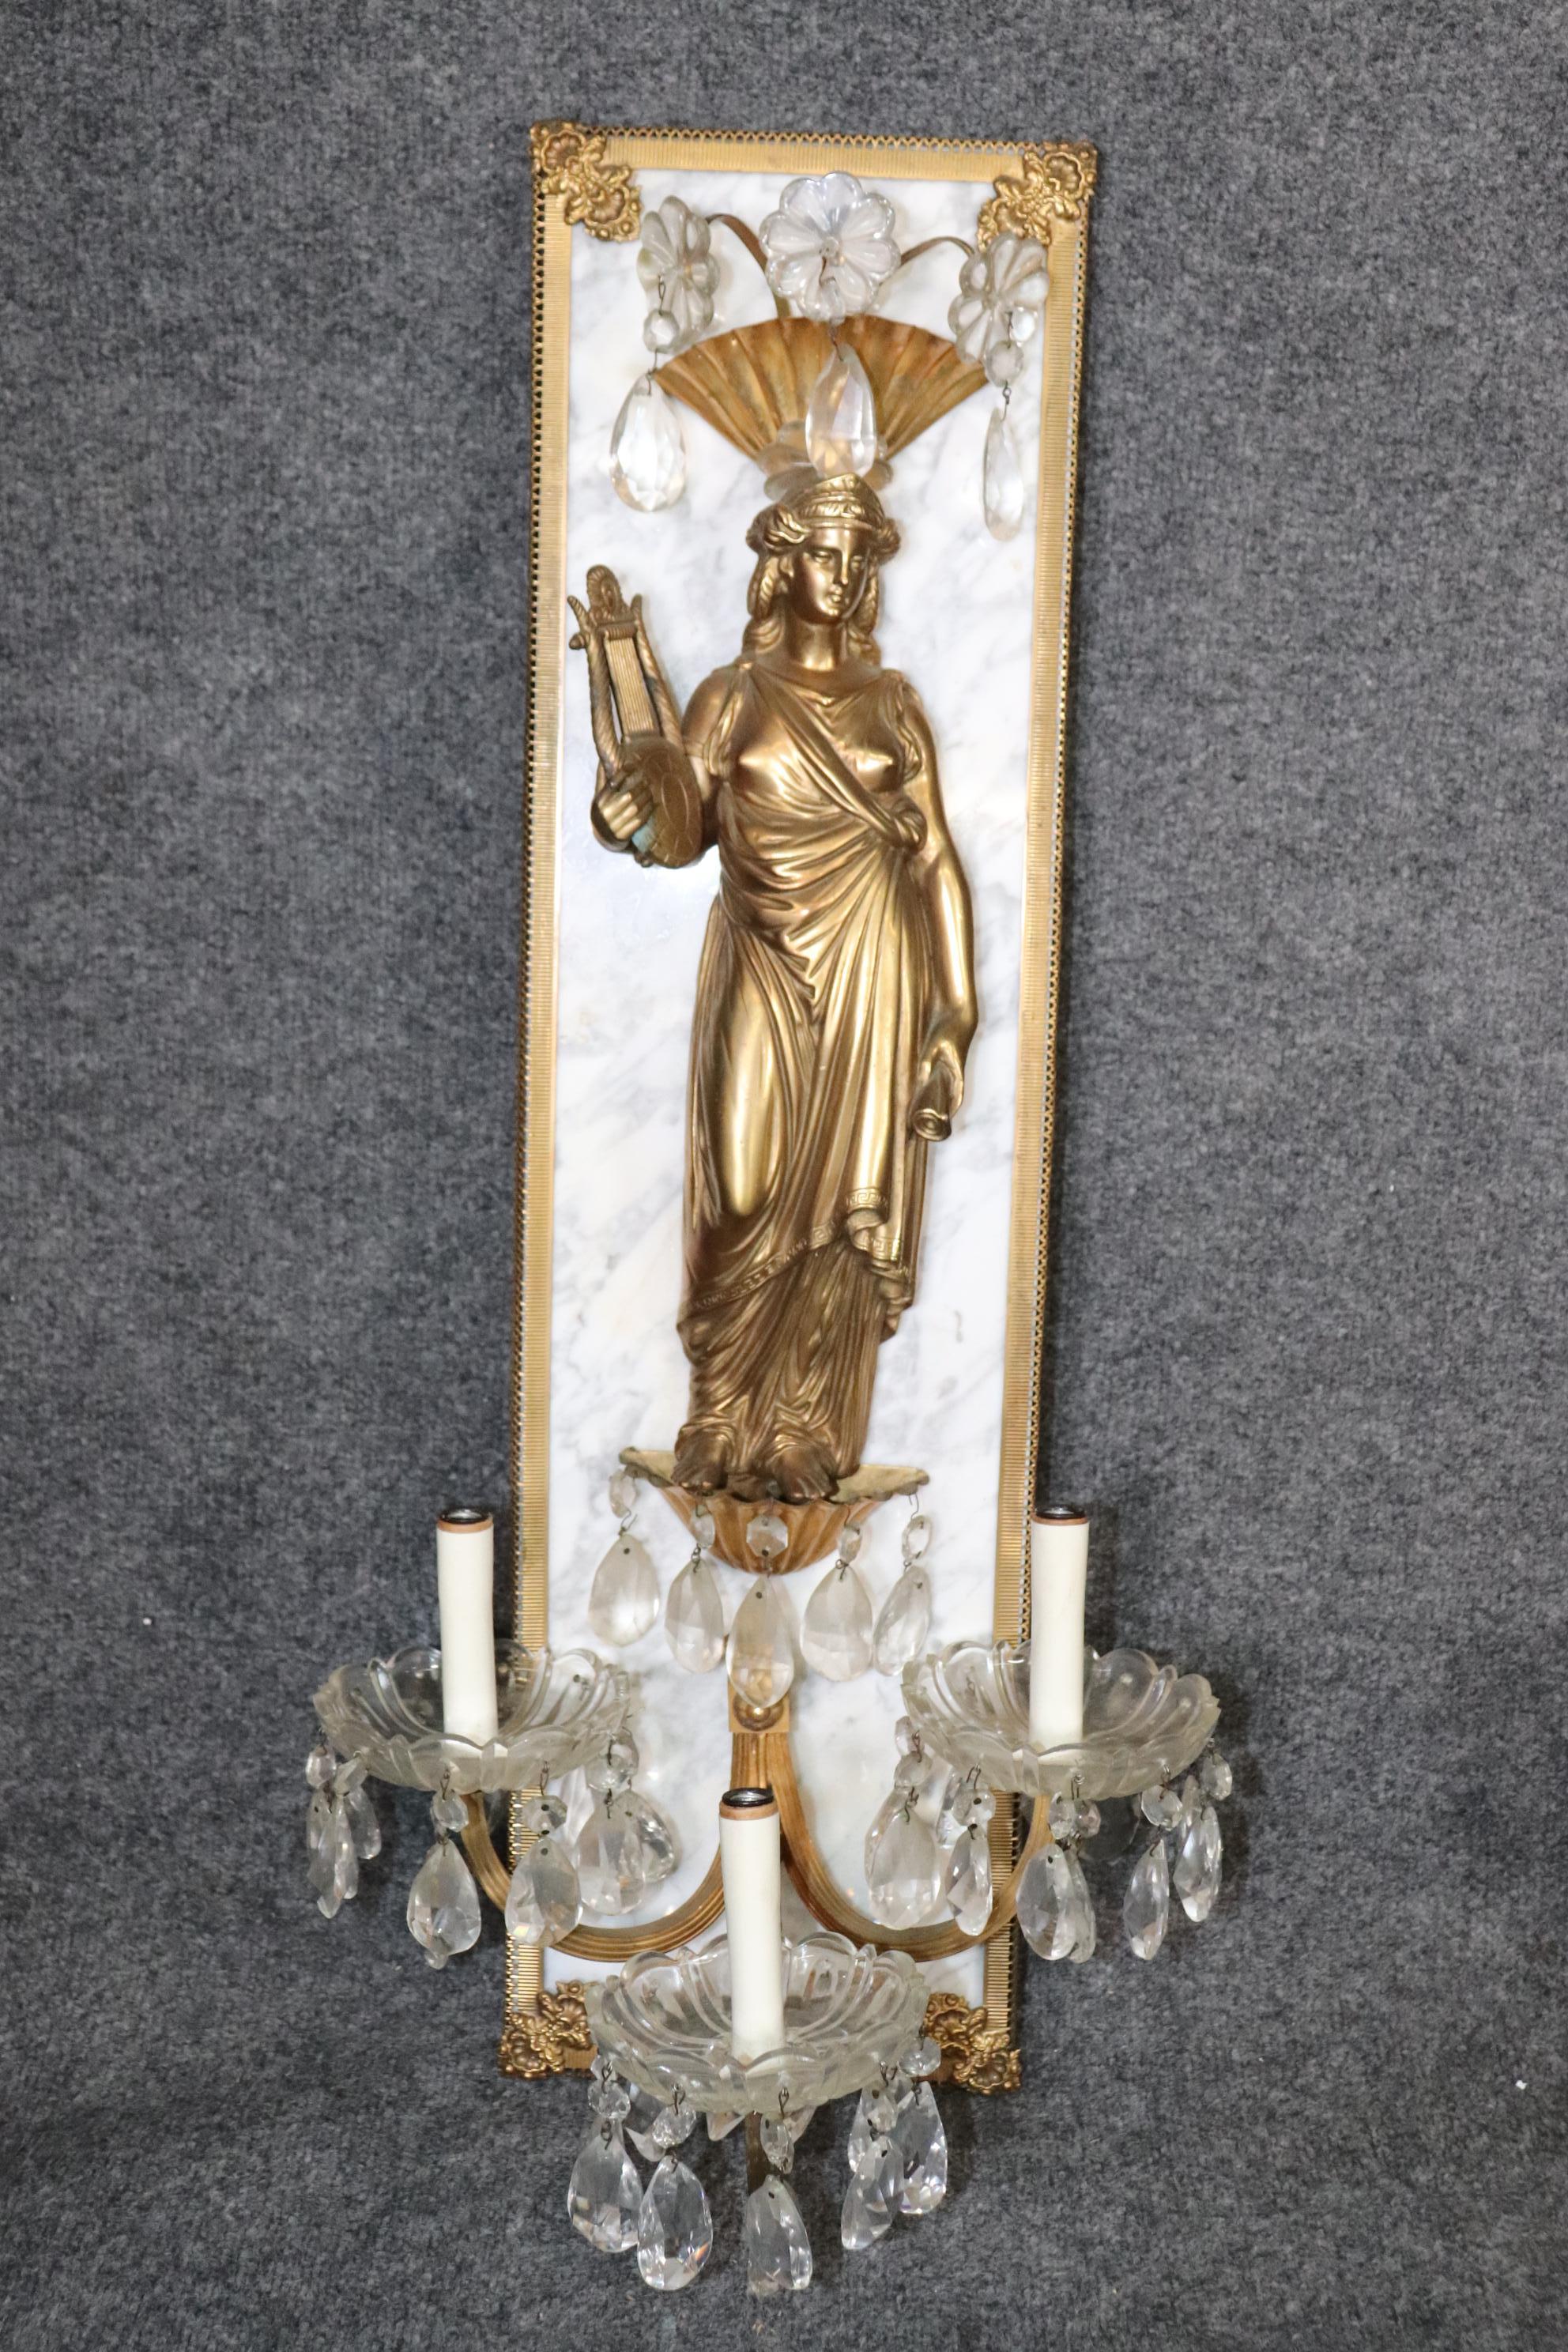 Dimensions- H: 30 1/4in W: 13 1/4in D: 9 1/2in 
This pair of french figural metal and marble multi light sconces is perfect for you and your home! This pair is bound to bring an overwhelming sense of luxury, elegance and sophistication and will